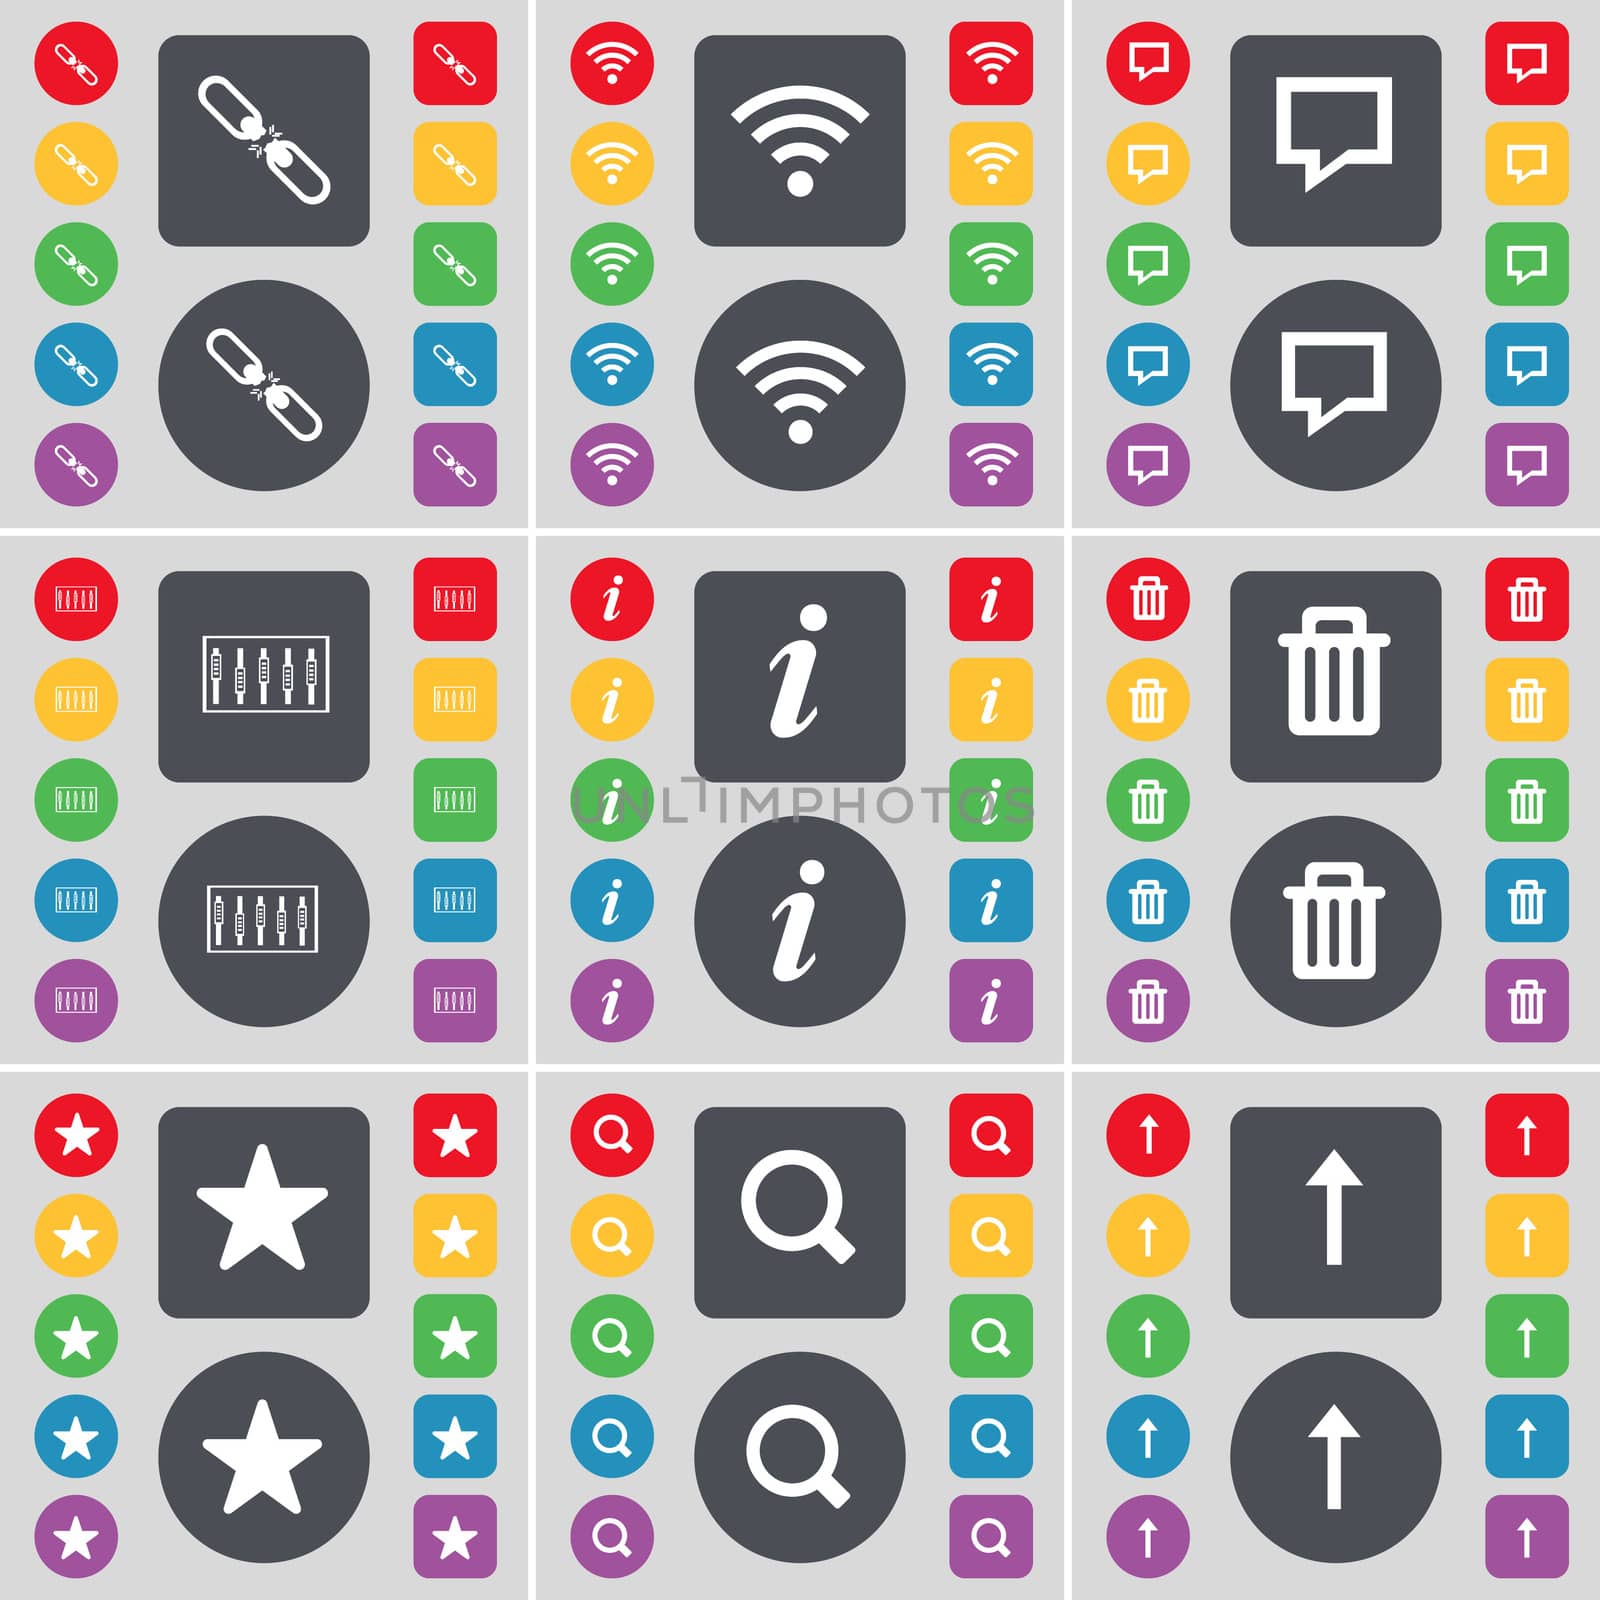 Link, Wi-Fi, Chat bubble, Equalizer, Information, Trash can, Star, Magnifying glass, Arrow up icon symbol. A large set of flat, colored buttons for your design.  by serhii_lohvyniuk